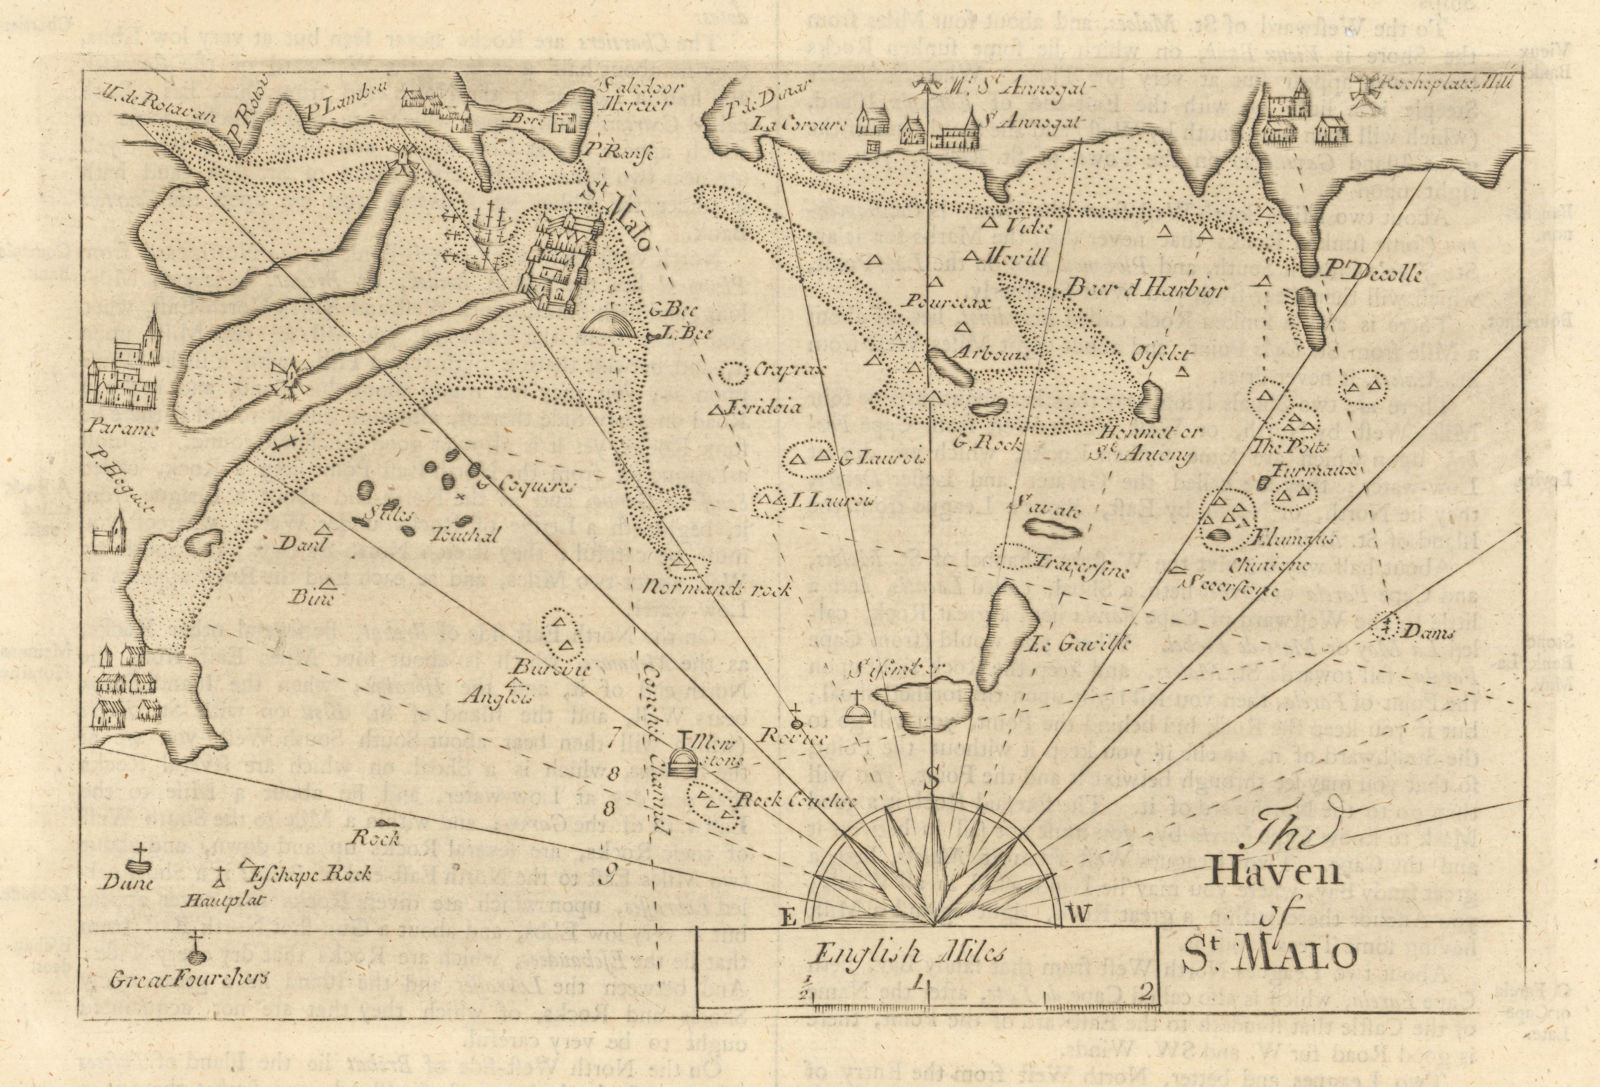 "The haven of St. Malo". Dinard Saint-Enogat. MOUNT & PAGE sea chart 1758 map